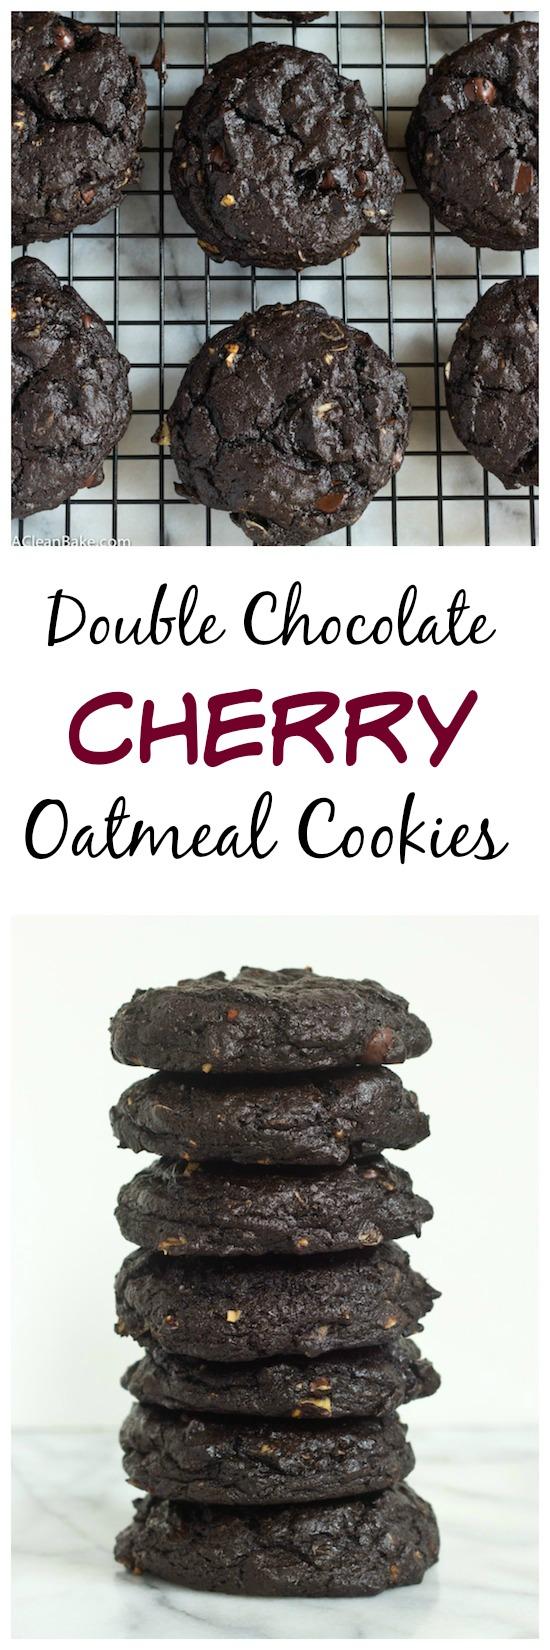 Get your chocolate fix with this Double Chocolate Cherry Oatmeal Cookies. They're gluten-free and can easily be made vegan. 